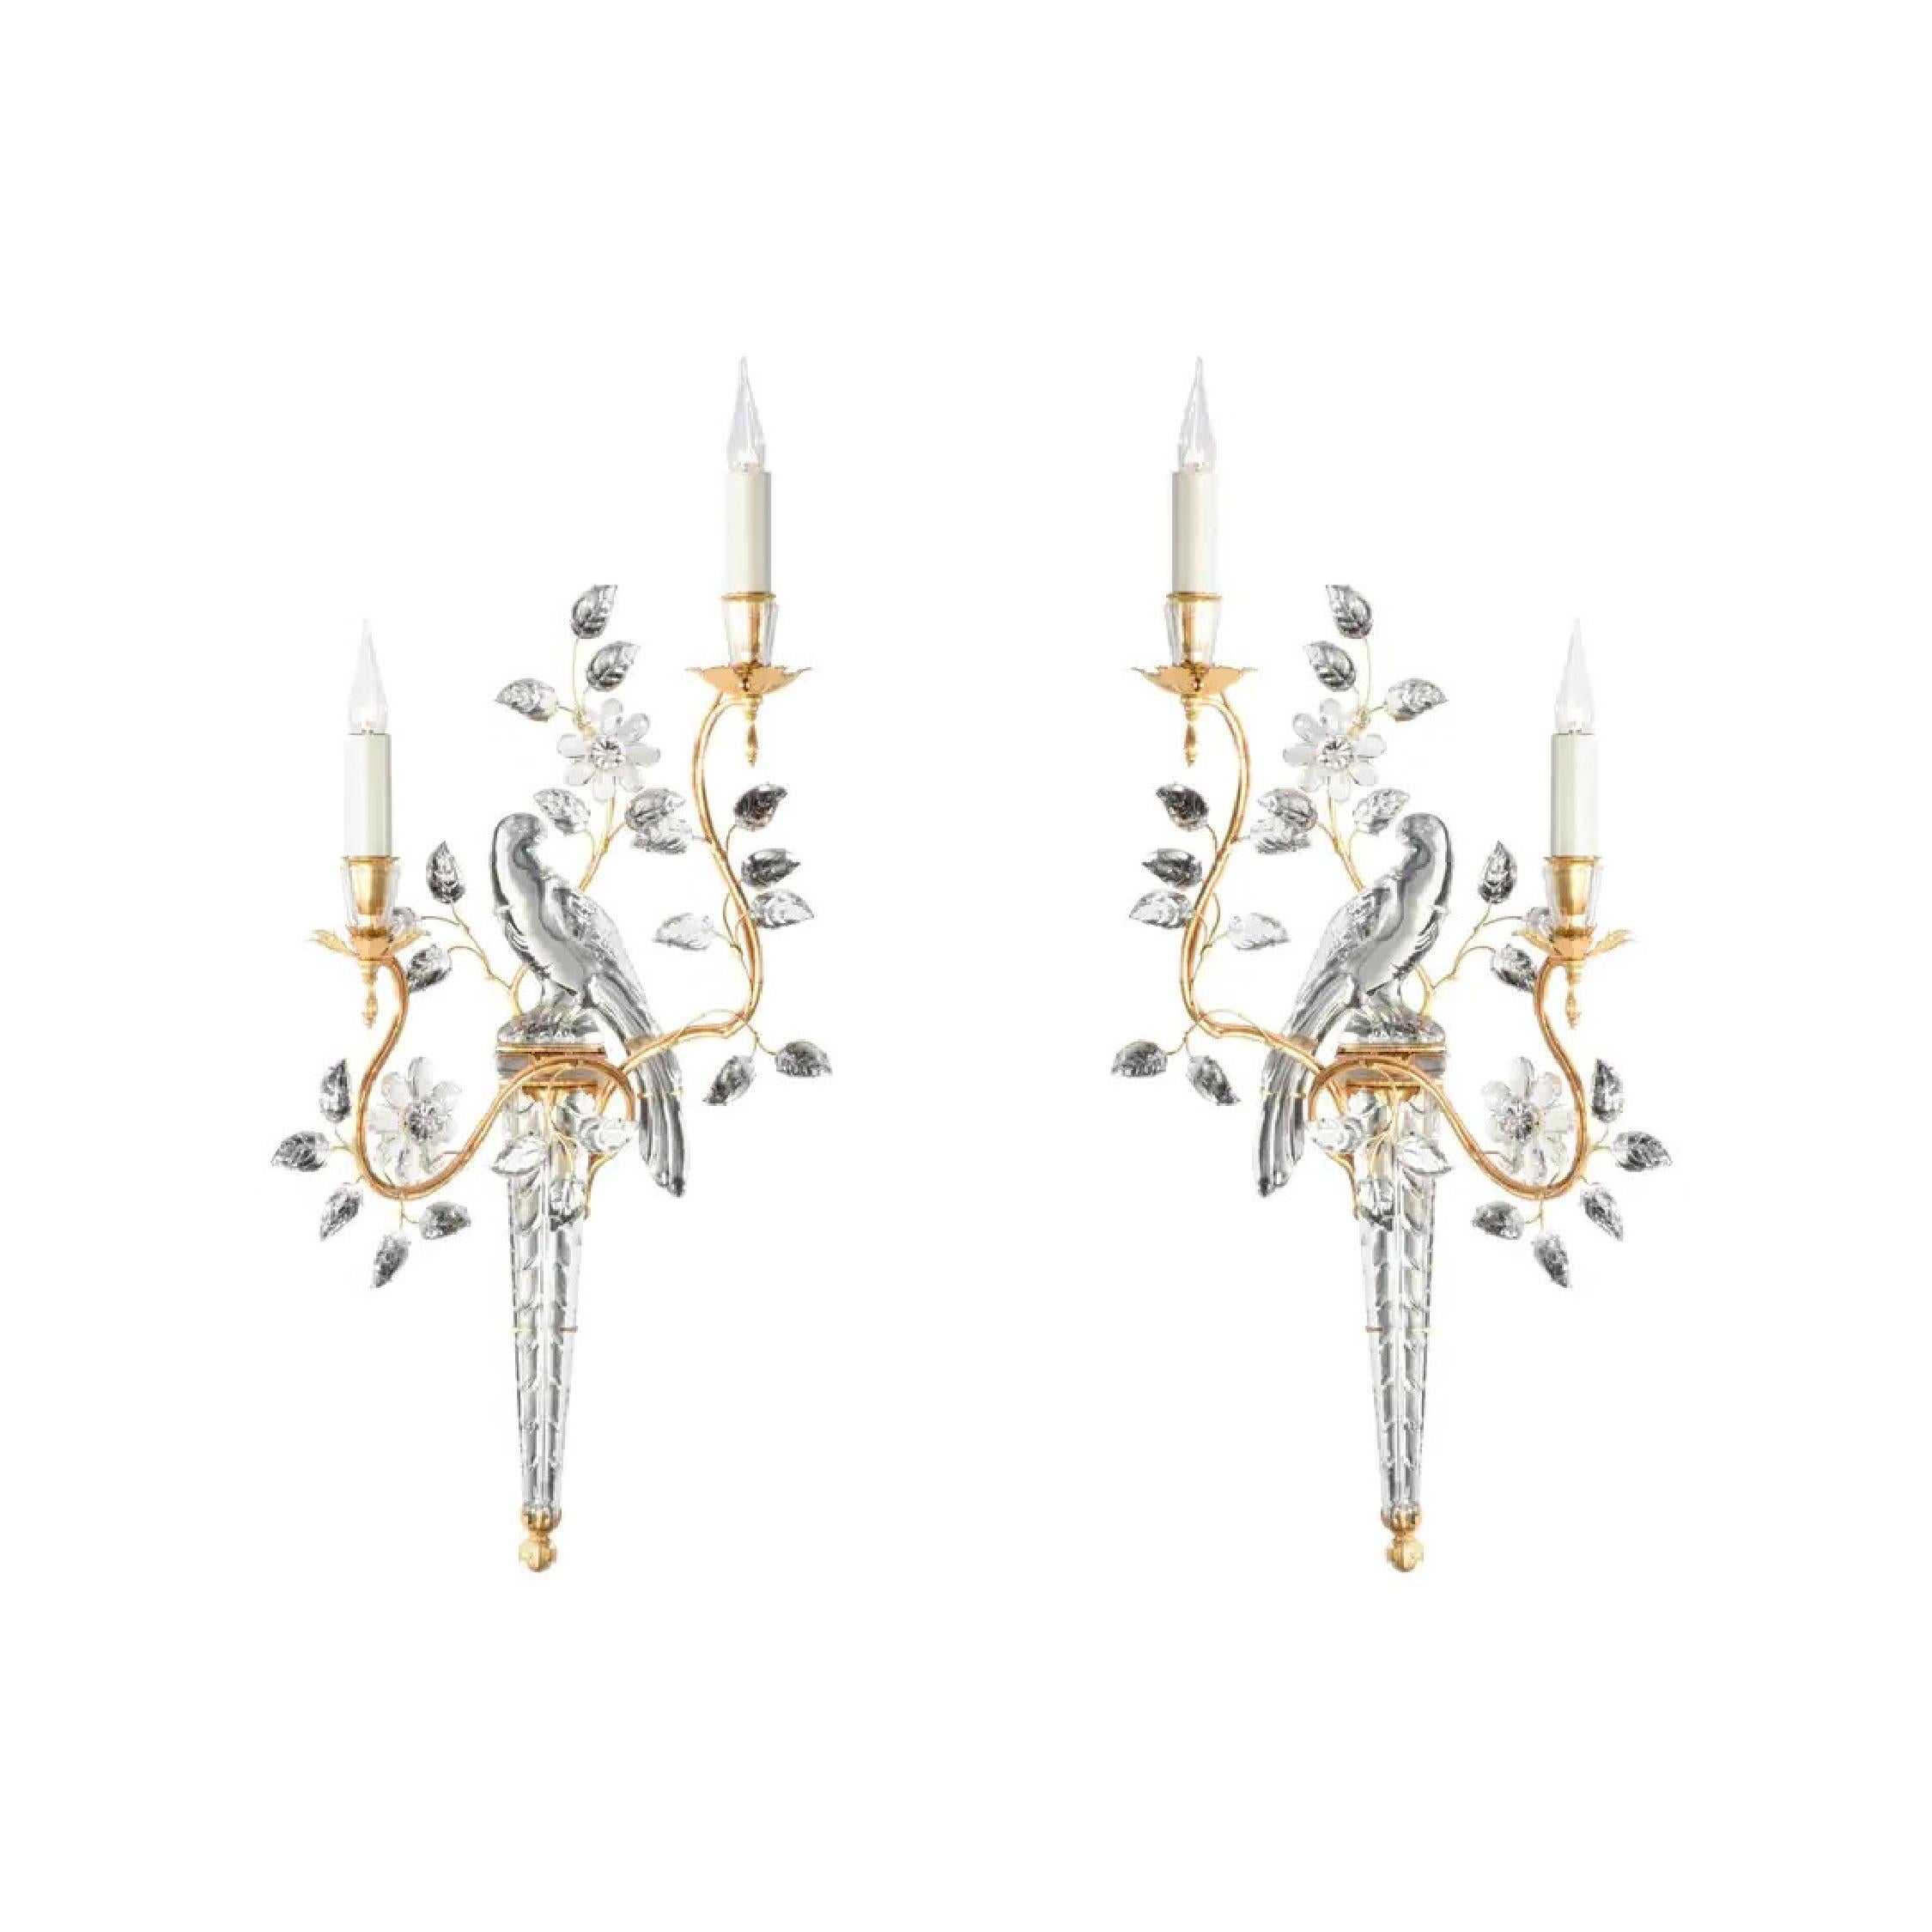 Maison Bagues #10393 2 pairs of 1930s style sconces. Two-light wall sconces in gilt silver or gilt gold finish that are handmade in France.
These decorative wall sconces are iron and crystal as they've always been since the 1930s (UL Listing